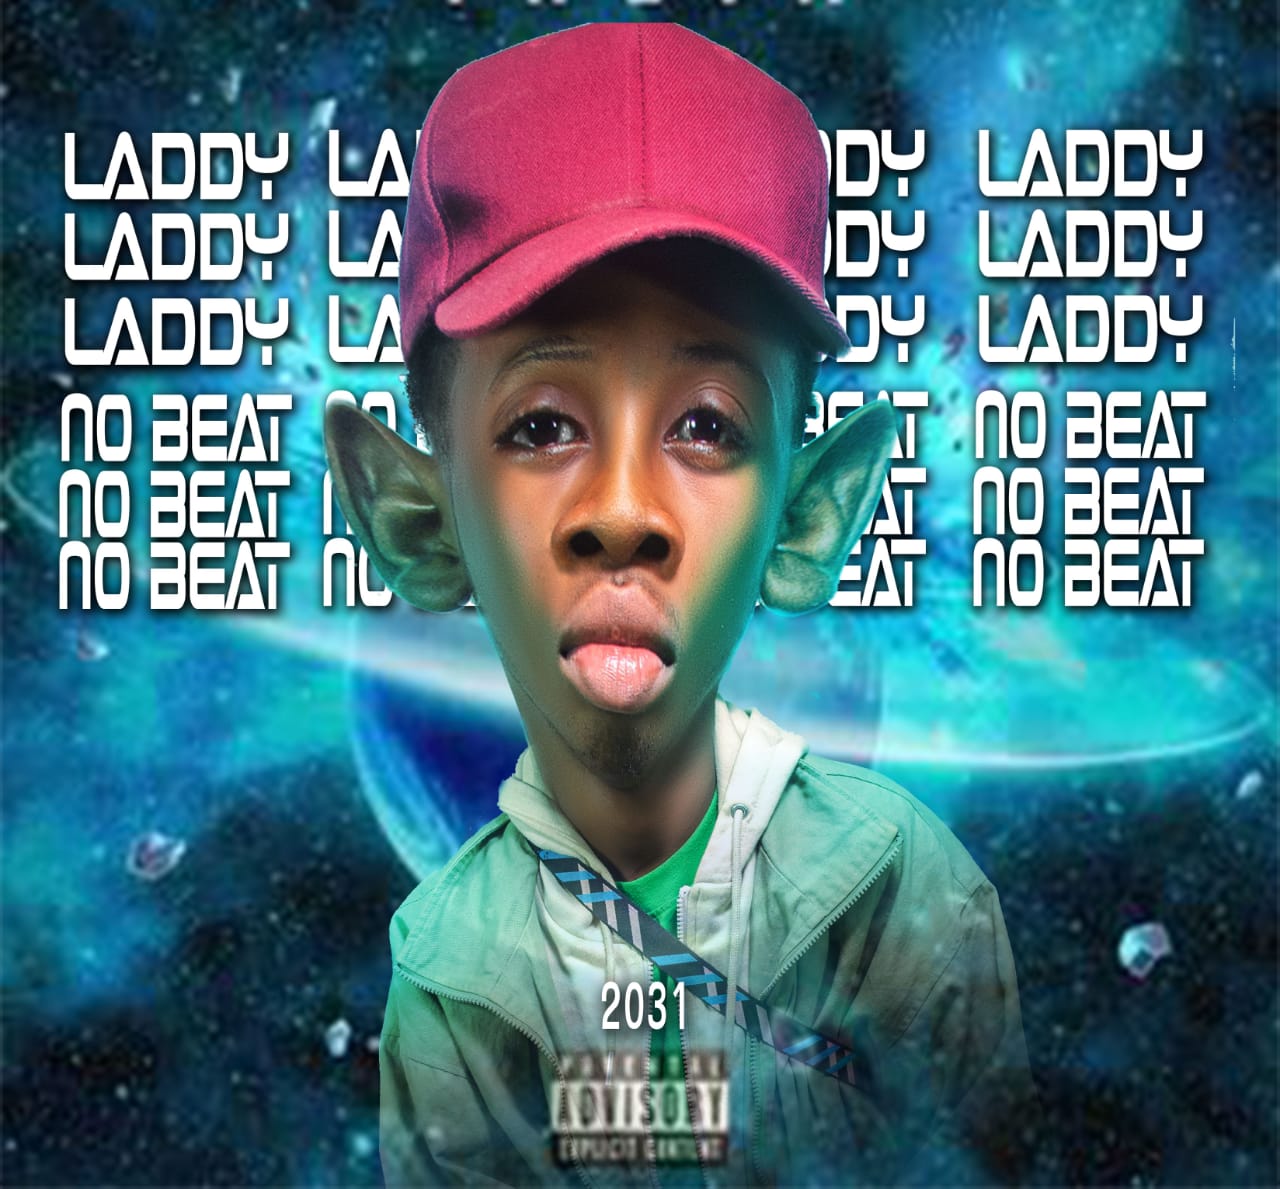 Laddy No Beat - Assassino Instrumental Afro House mp3 download